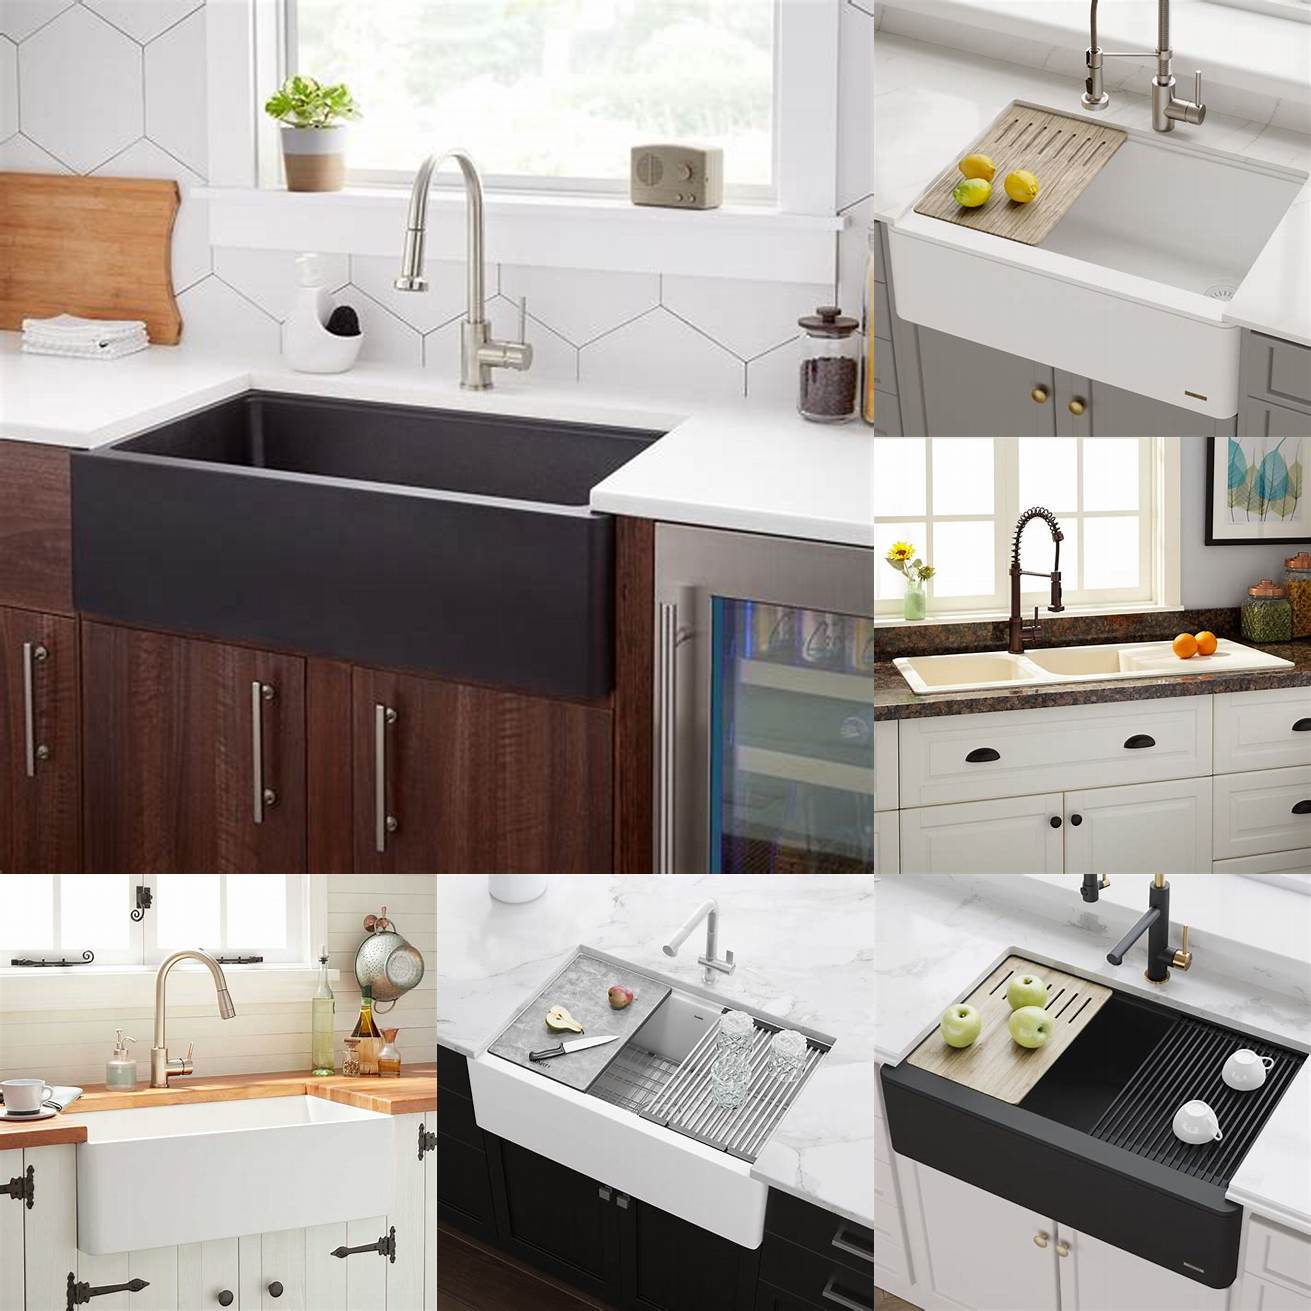 Image of a composite kitchen sink with a farmhouse style kitchen